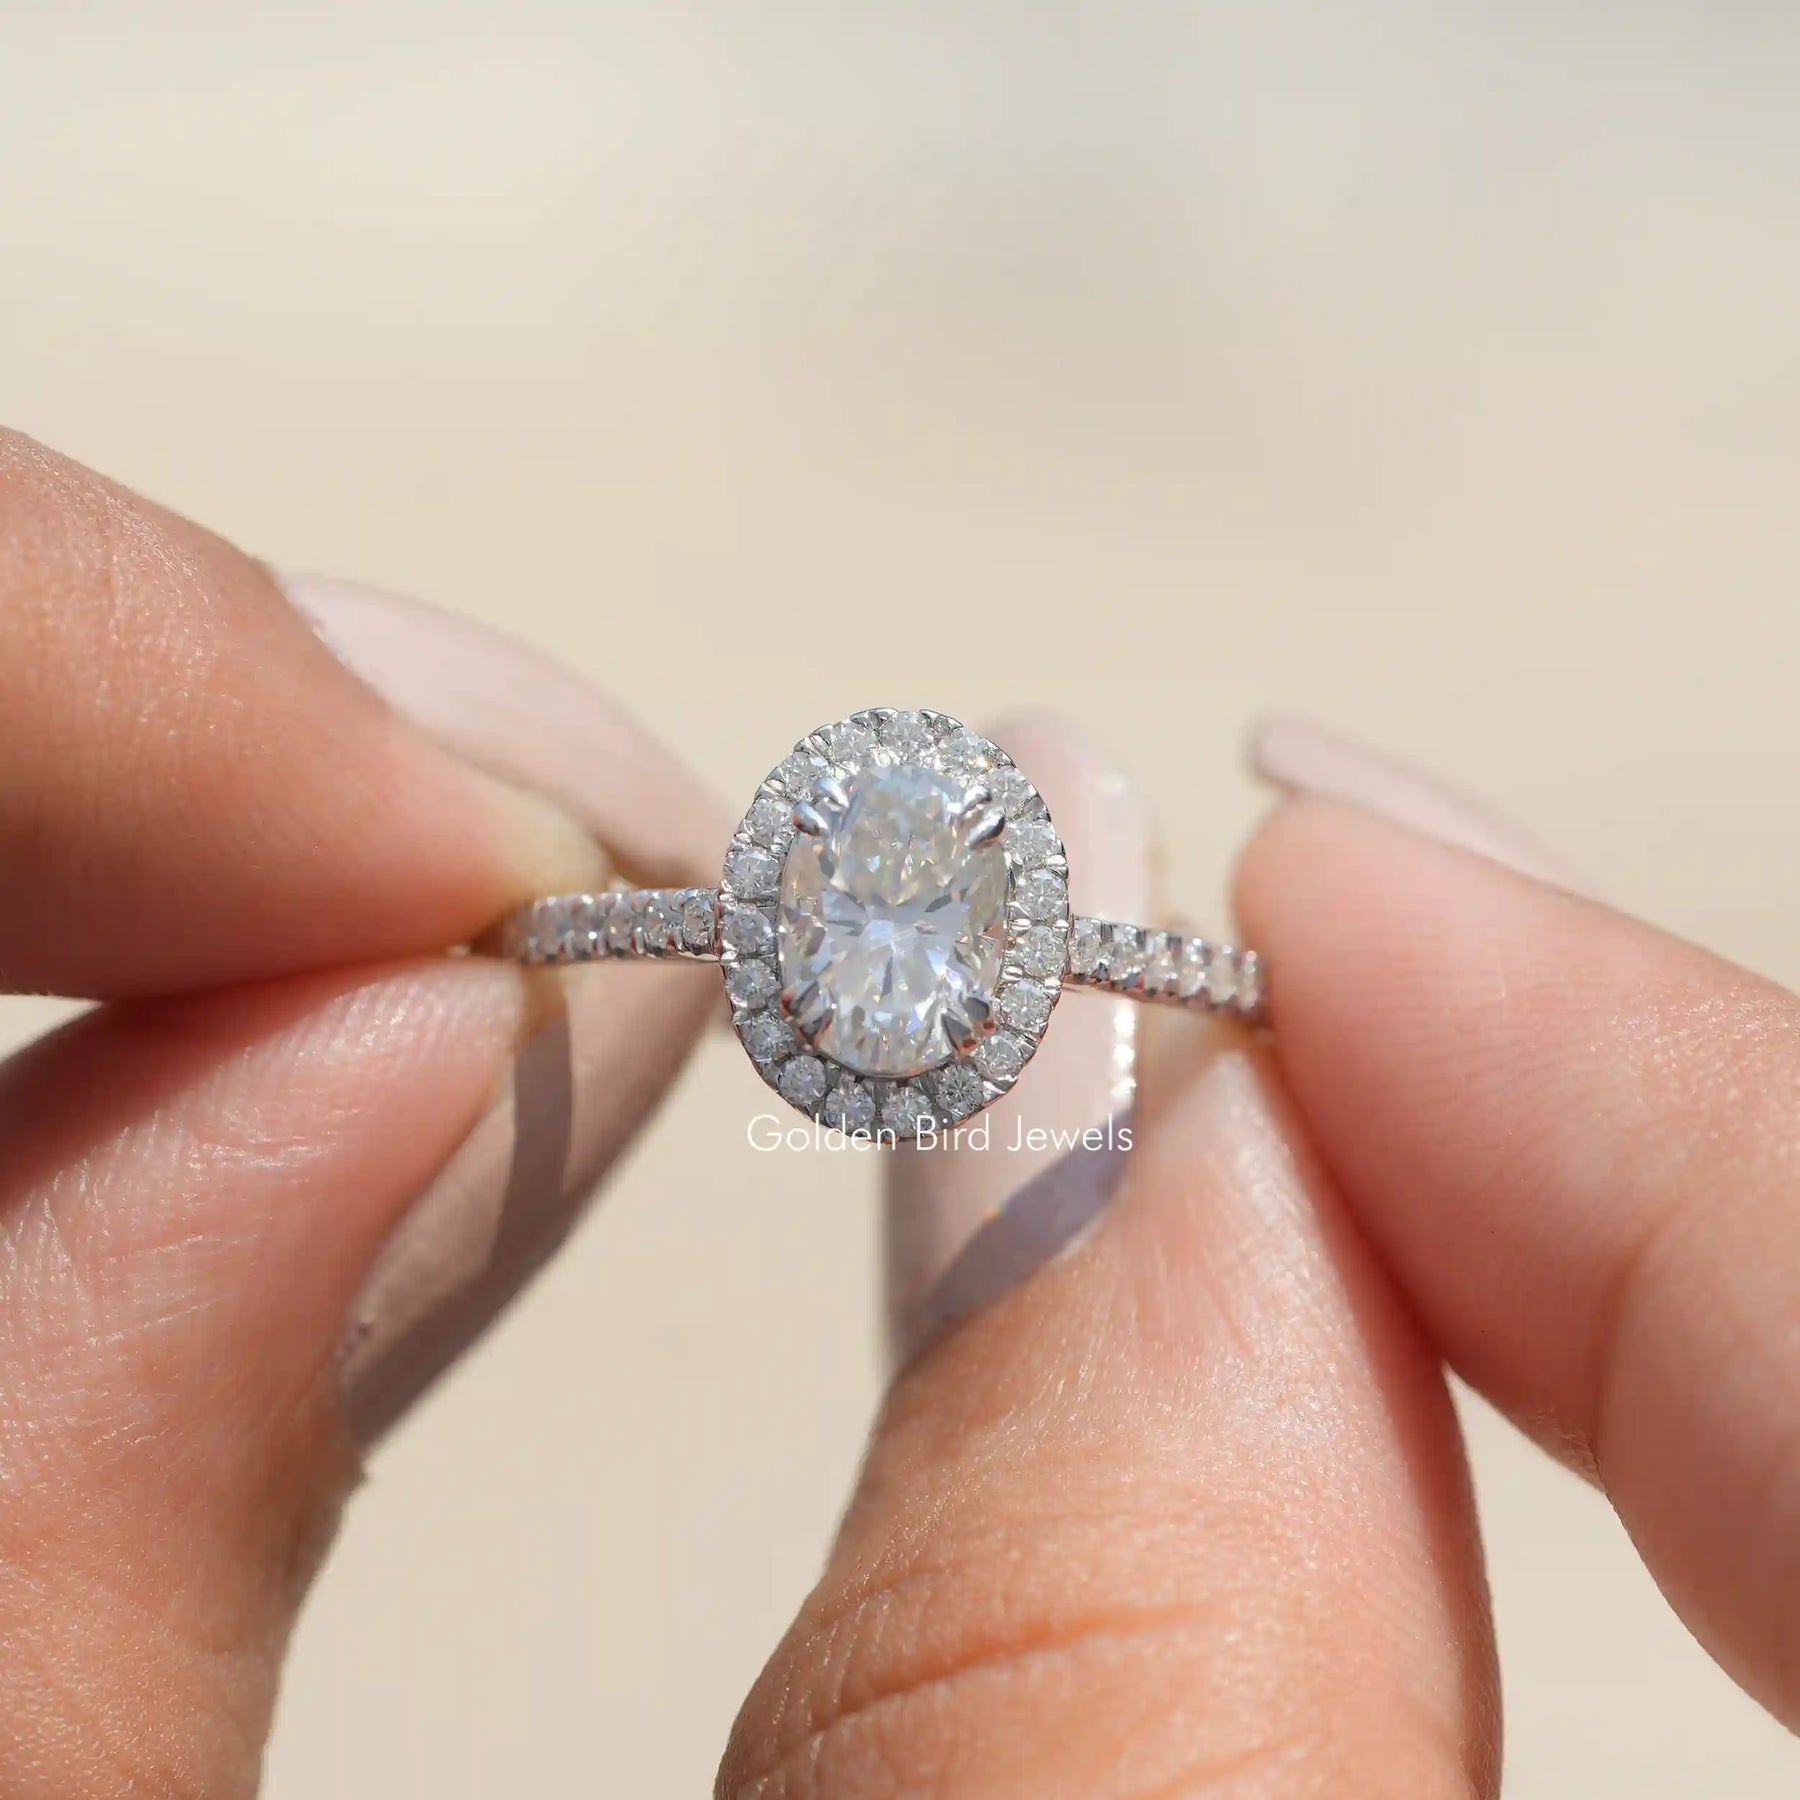 [Crushed Ice Oval Cut Moissanite Engagement Ring Set In Double Prongs]-[Golden Bird Jewels] 